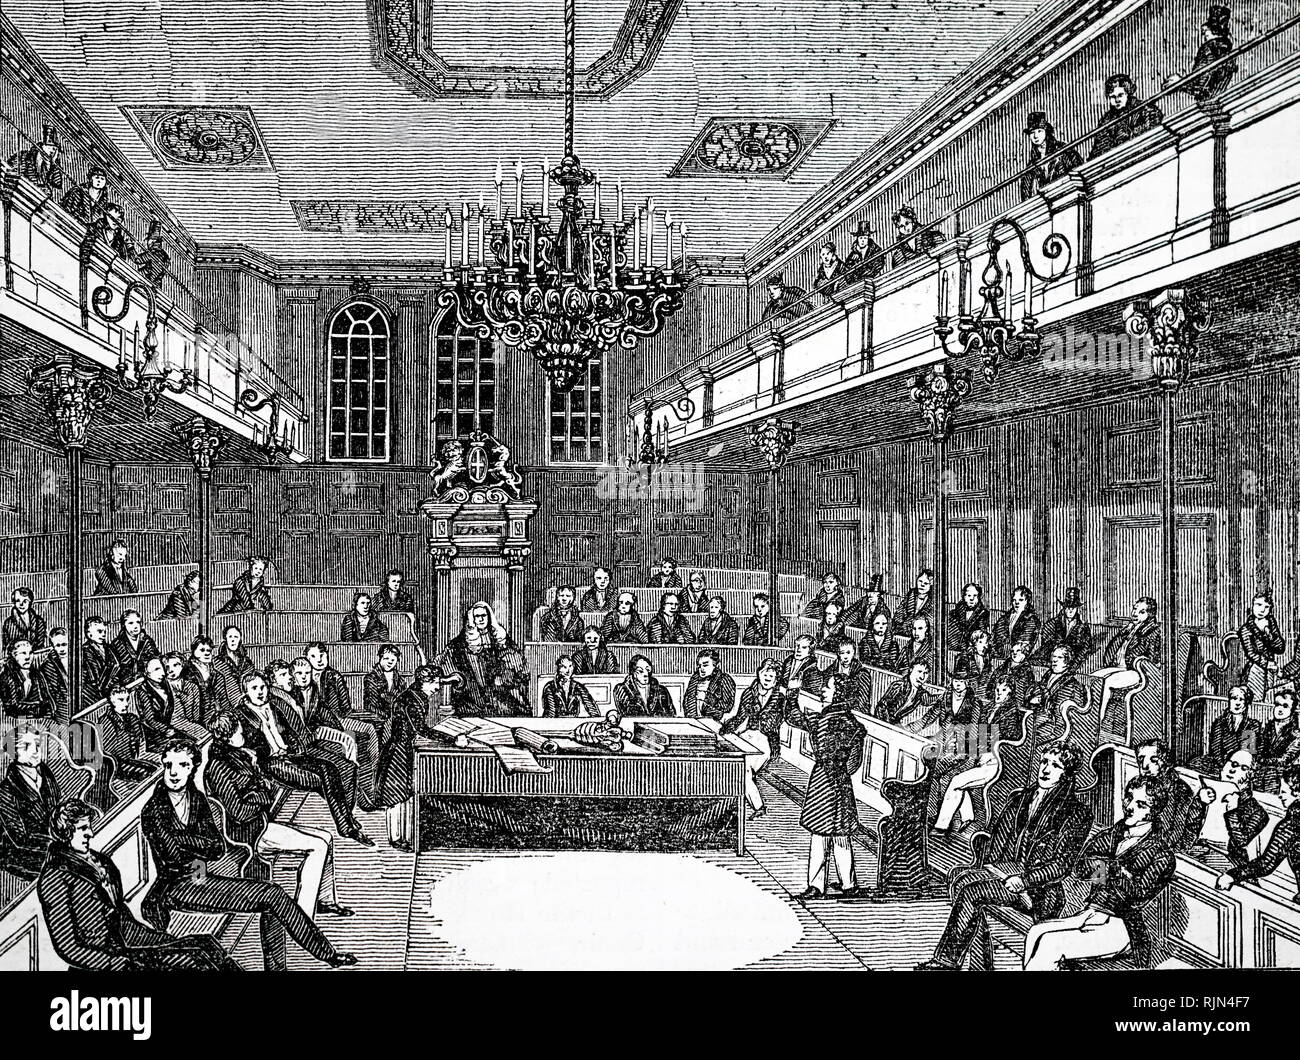 Illustration showing a sitting of the House of Commons, Parliament, London 1833 Stock Photo